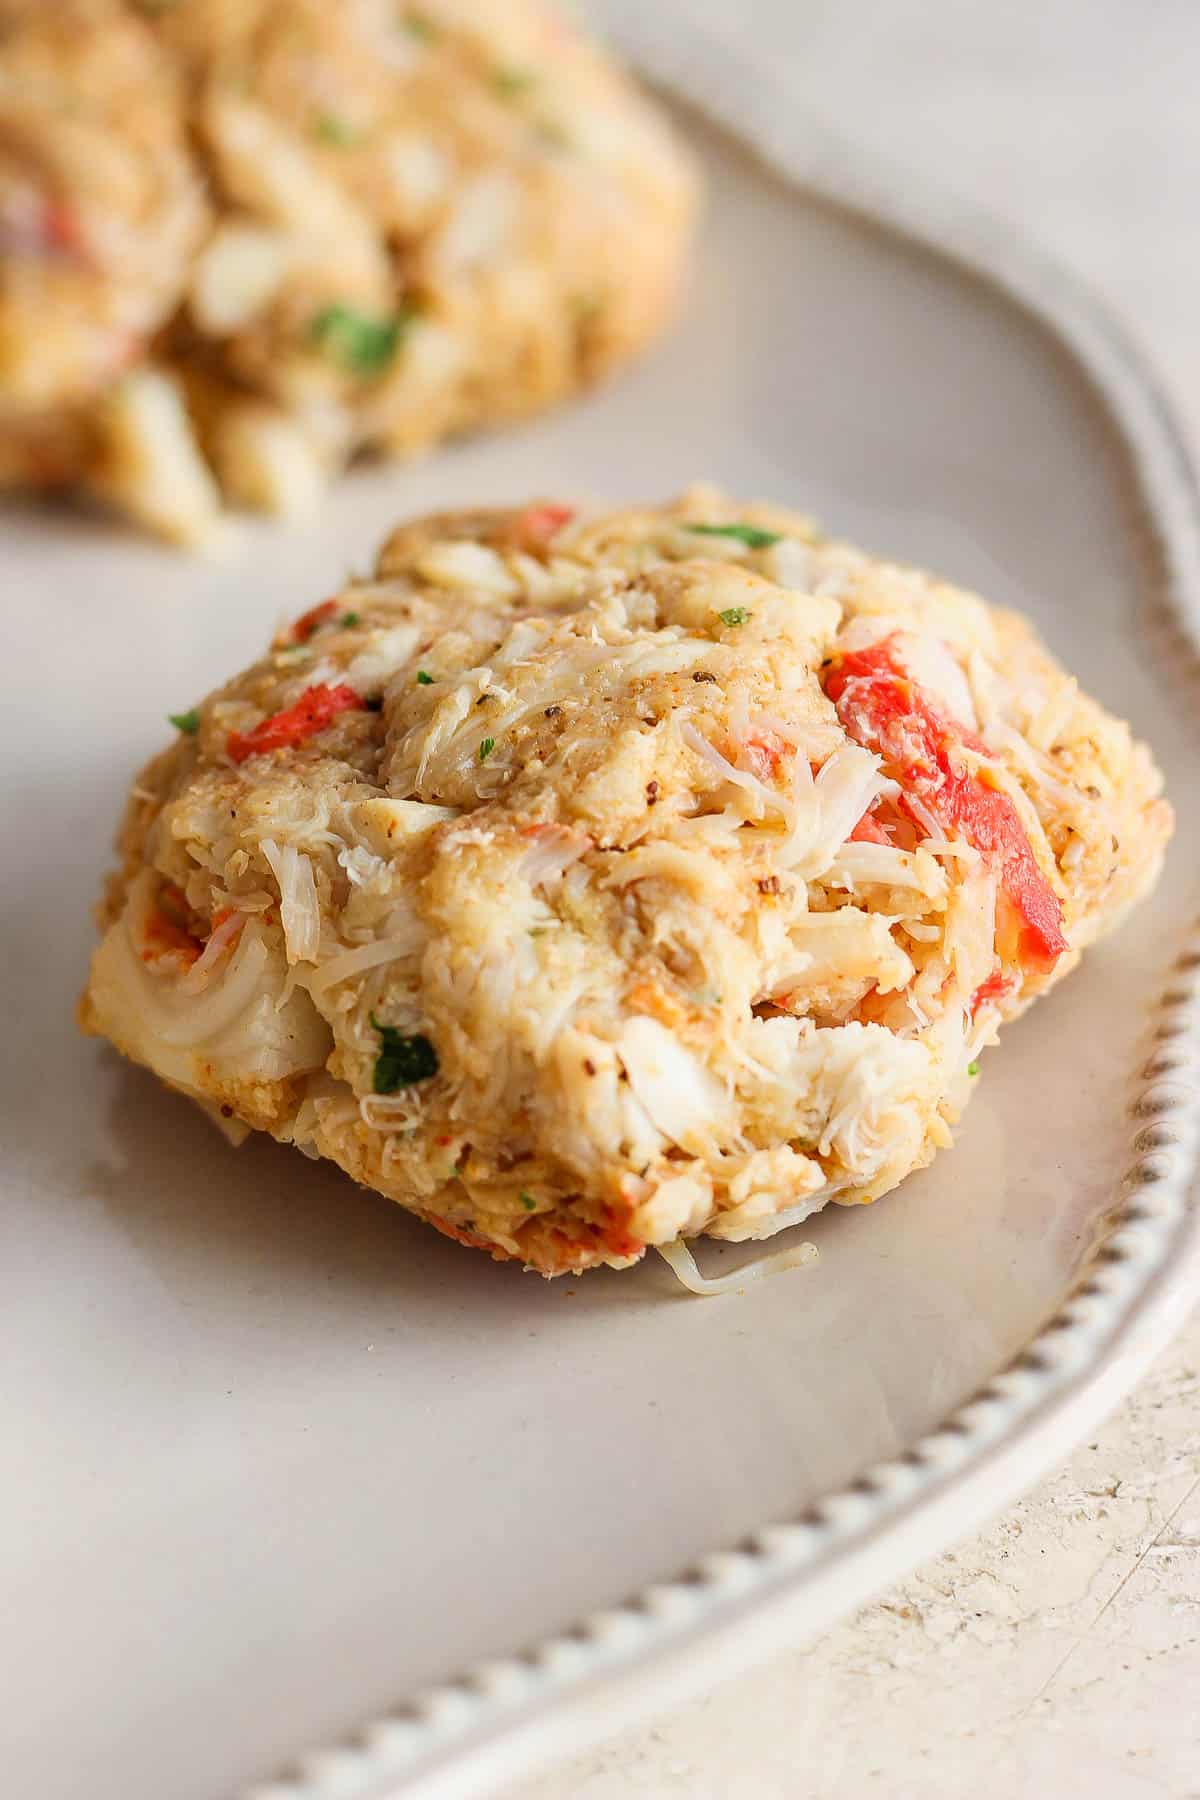 A formed crab cake on a plate.